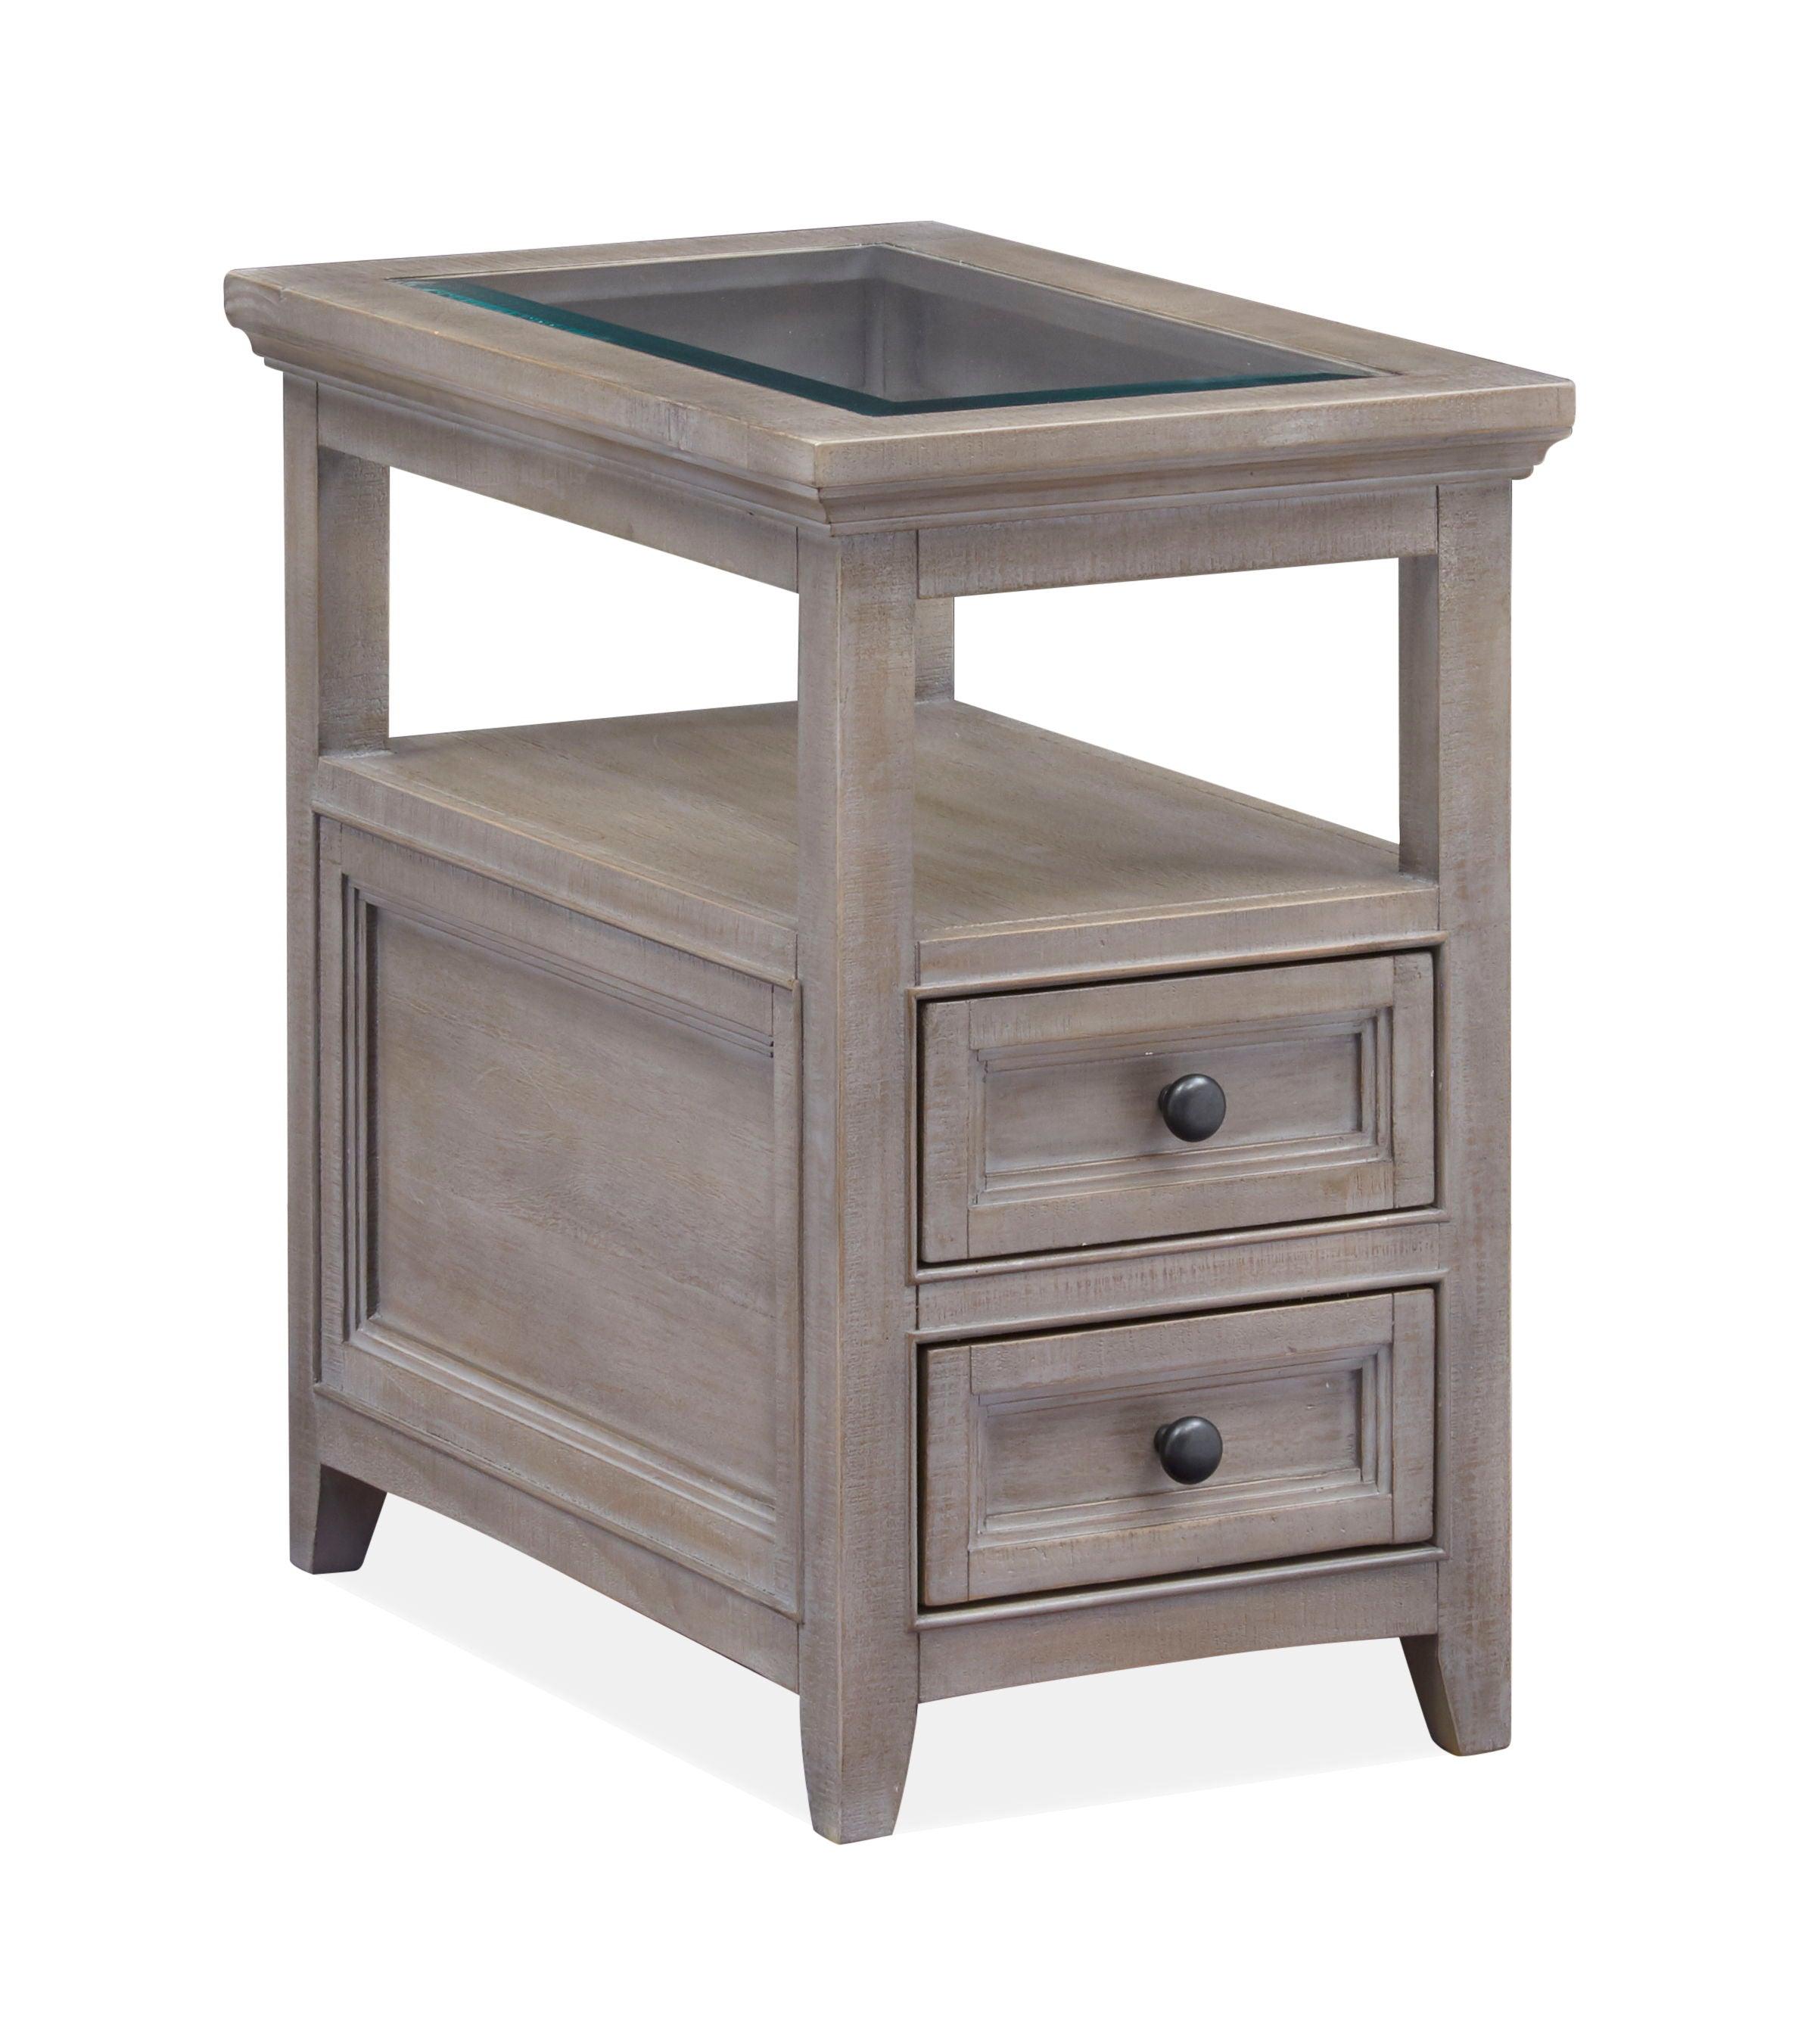 Magnussen Furniture - Paxton Place - Chairside End Table - Dovetail Grey - 5th Avenue Furniture